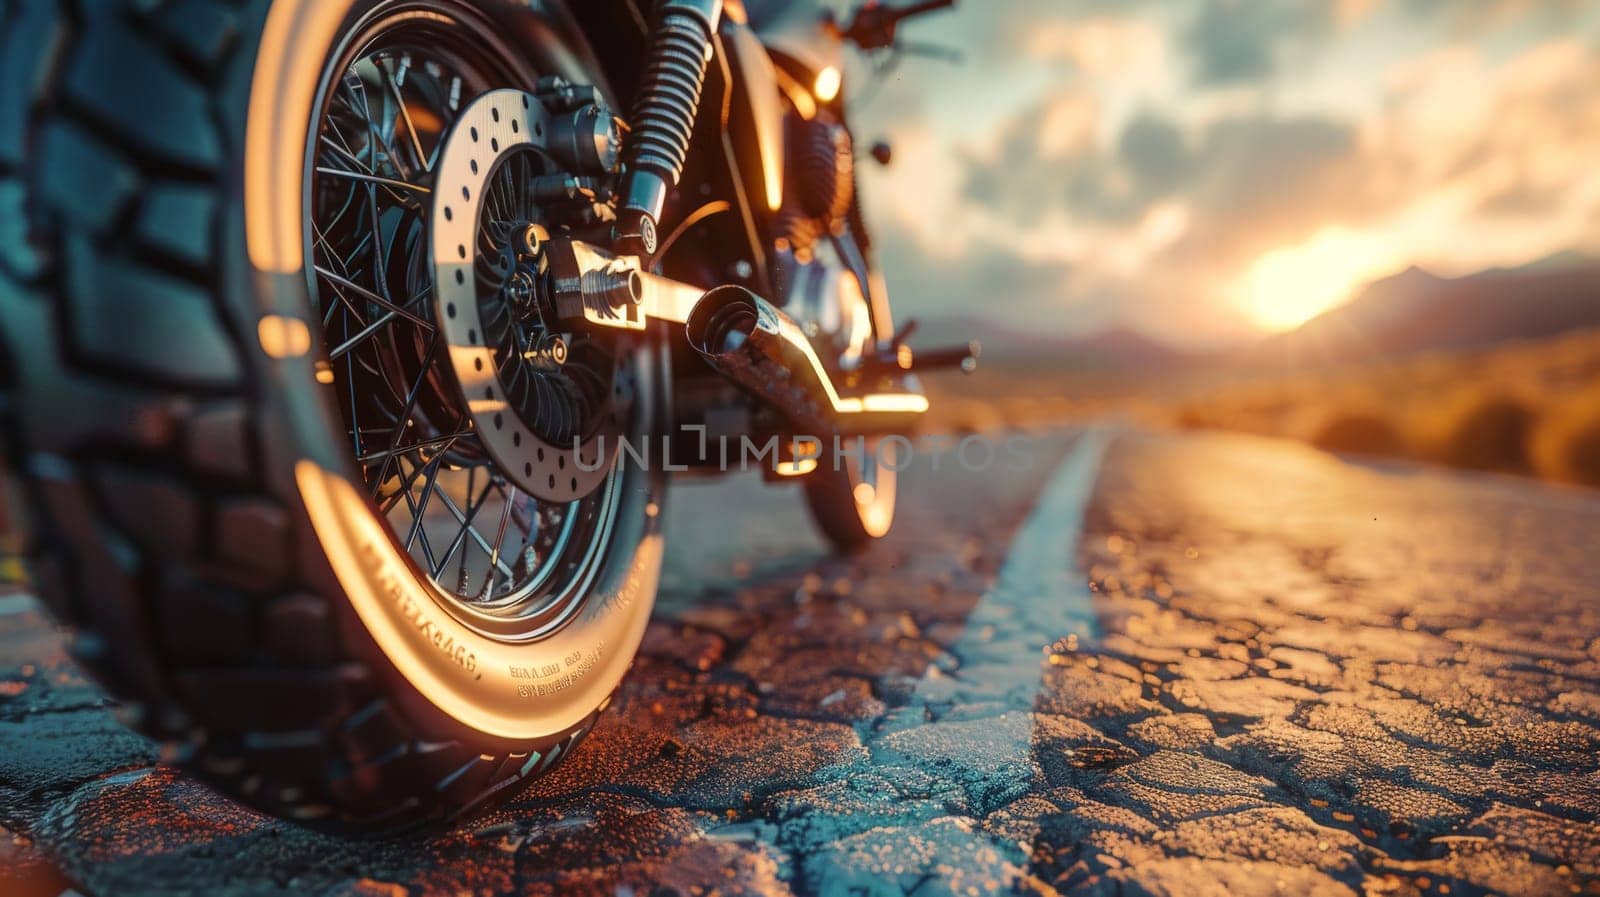 A motorcycle parking on the road side and sunset, select focusing background.